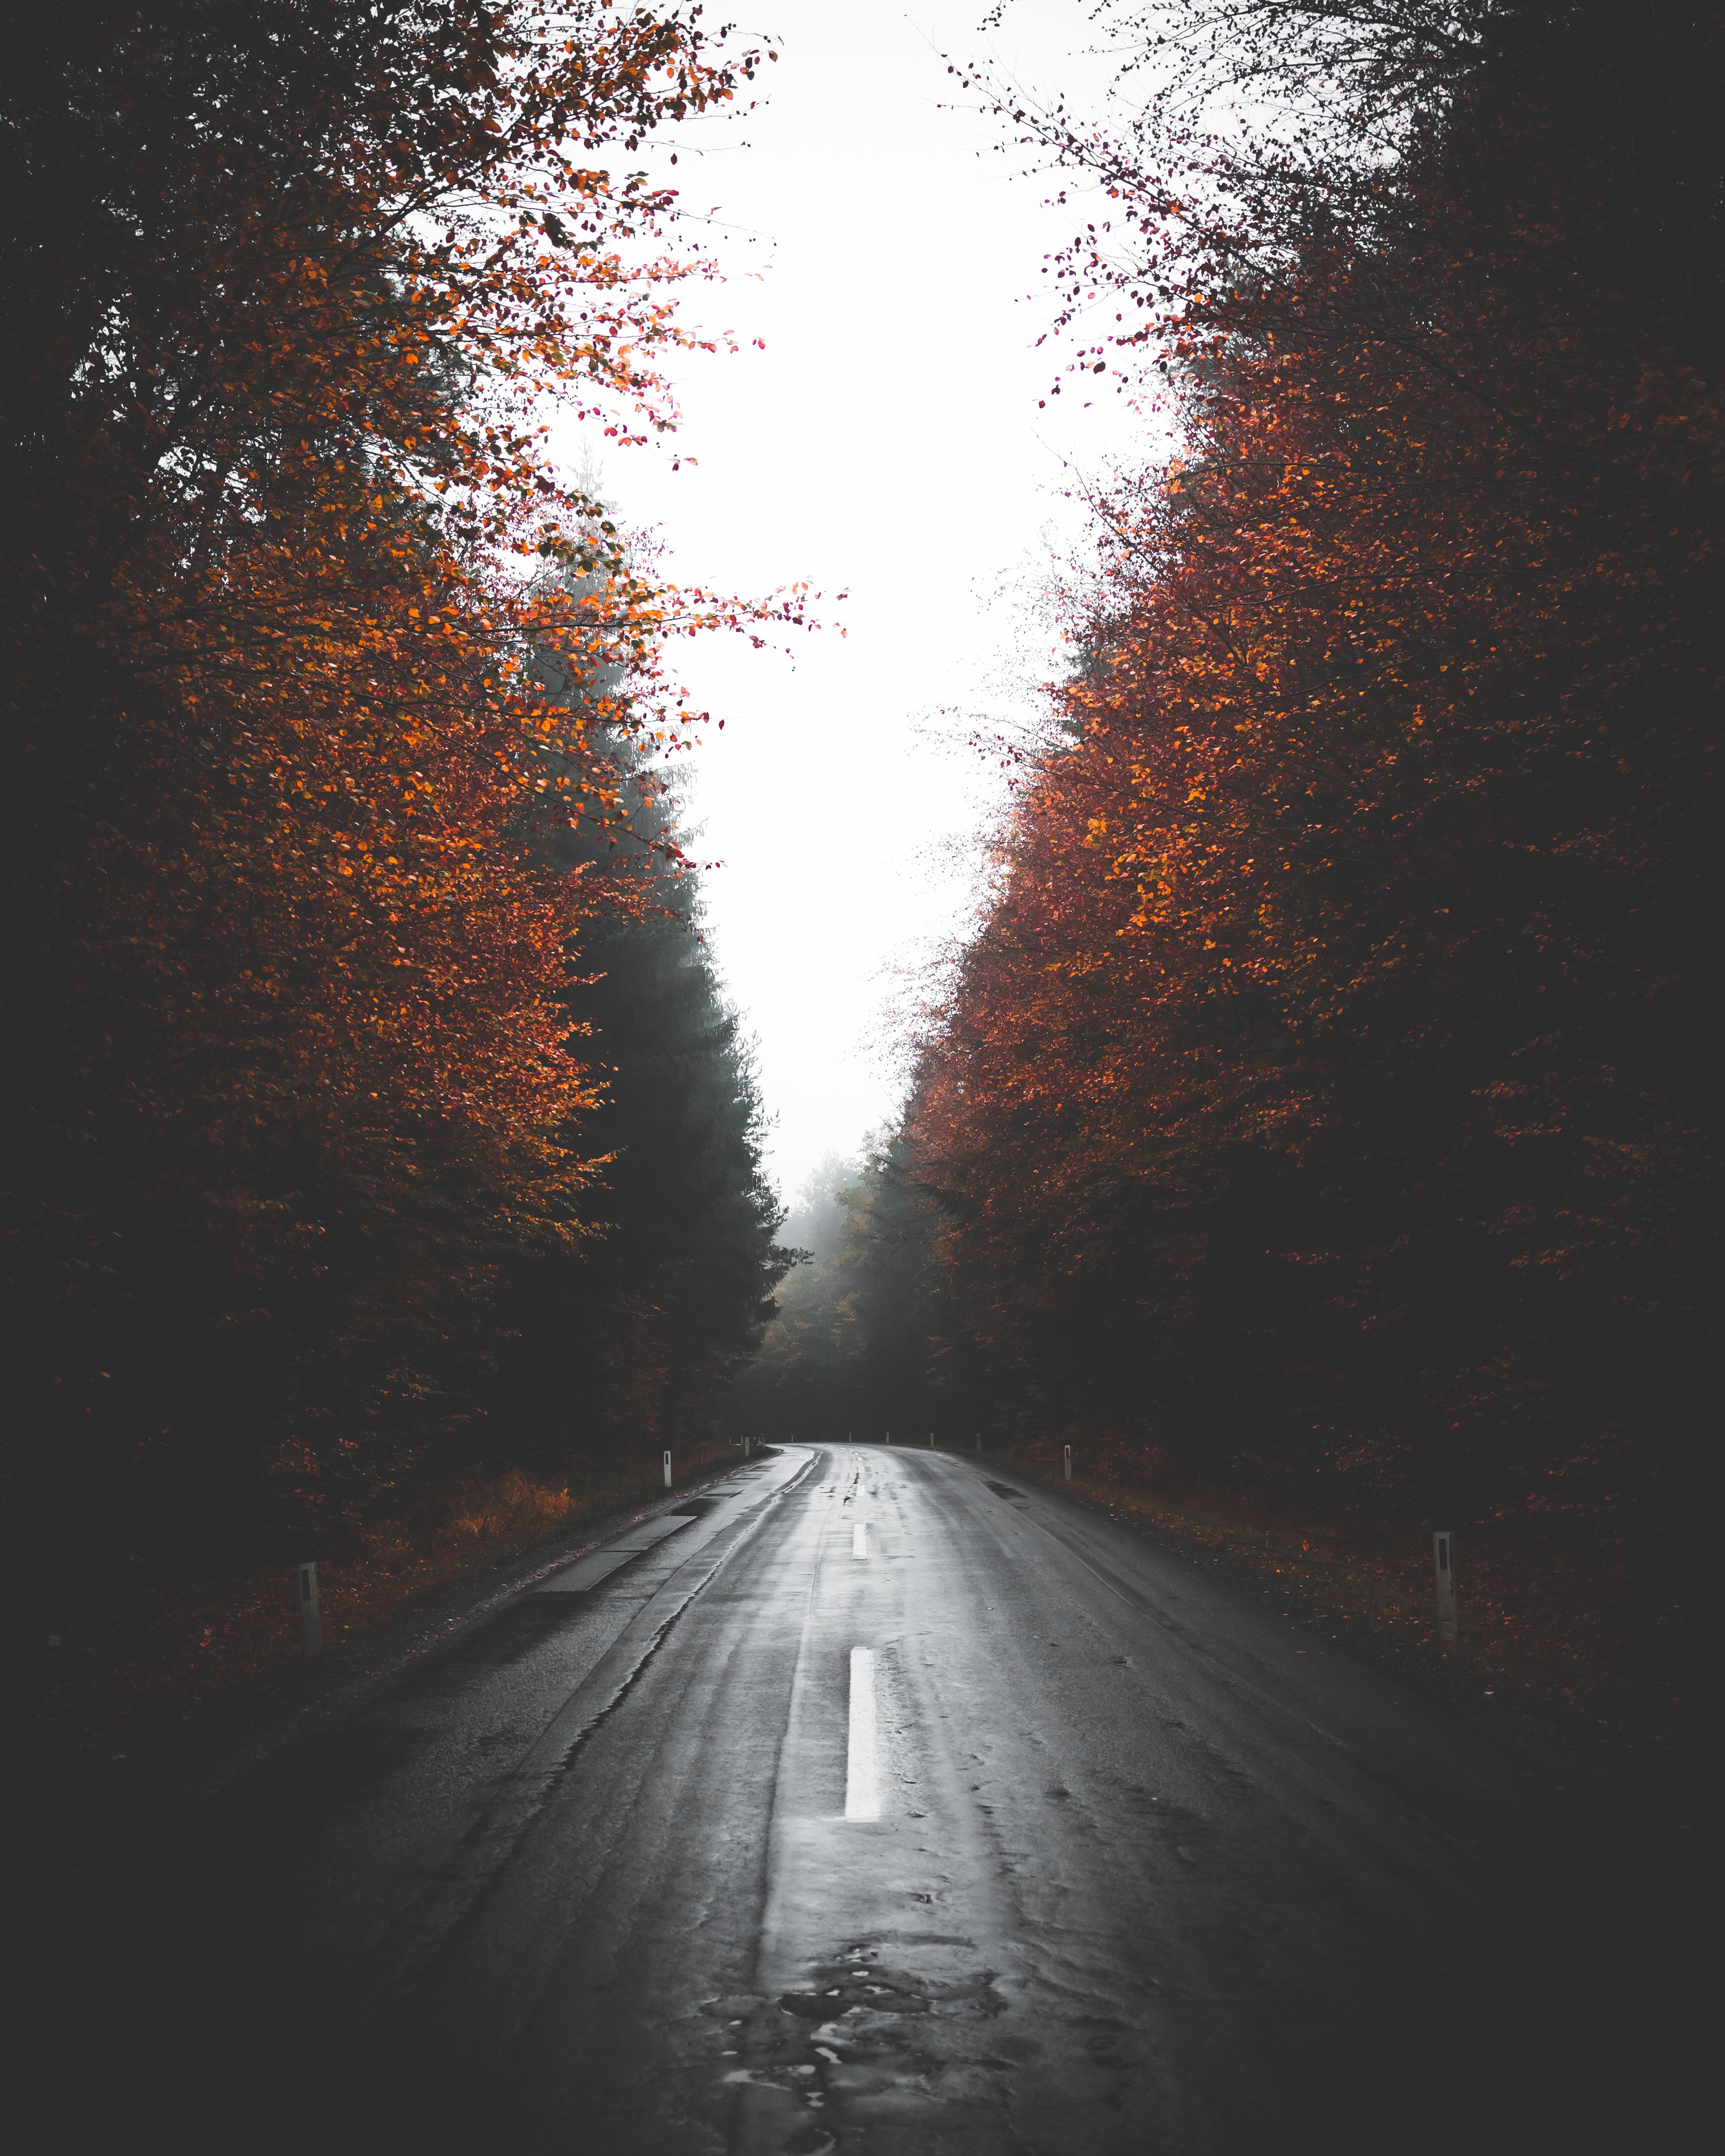 141810 download wallpaper asphalt, nature, trees, autumn, road, turn, fog screensavers and pictures for free